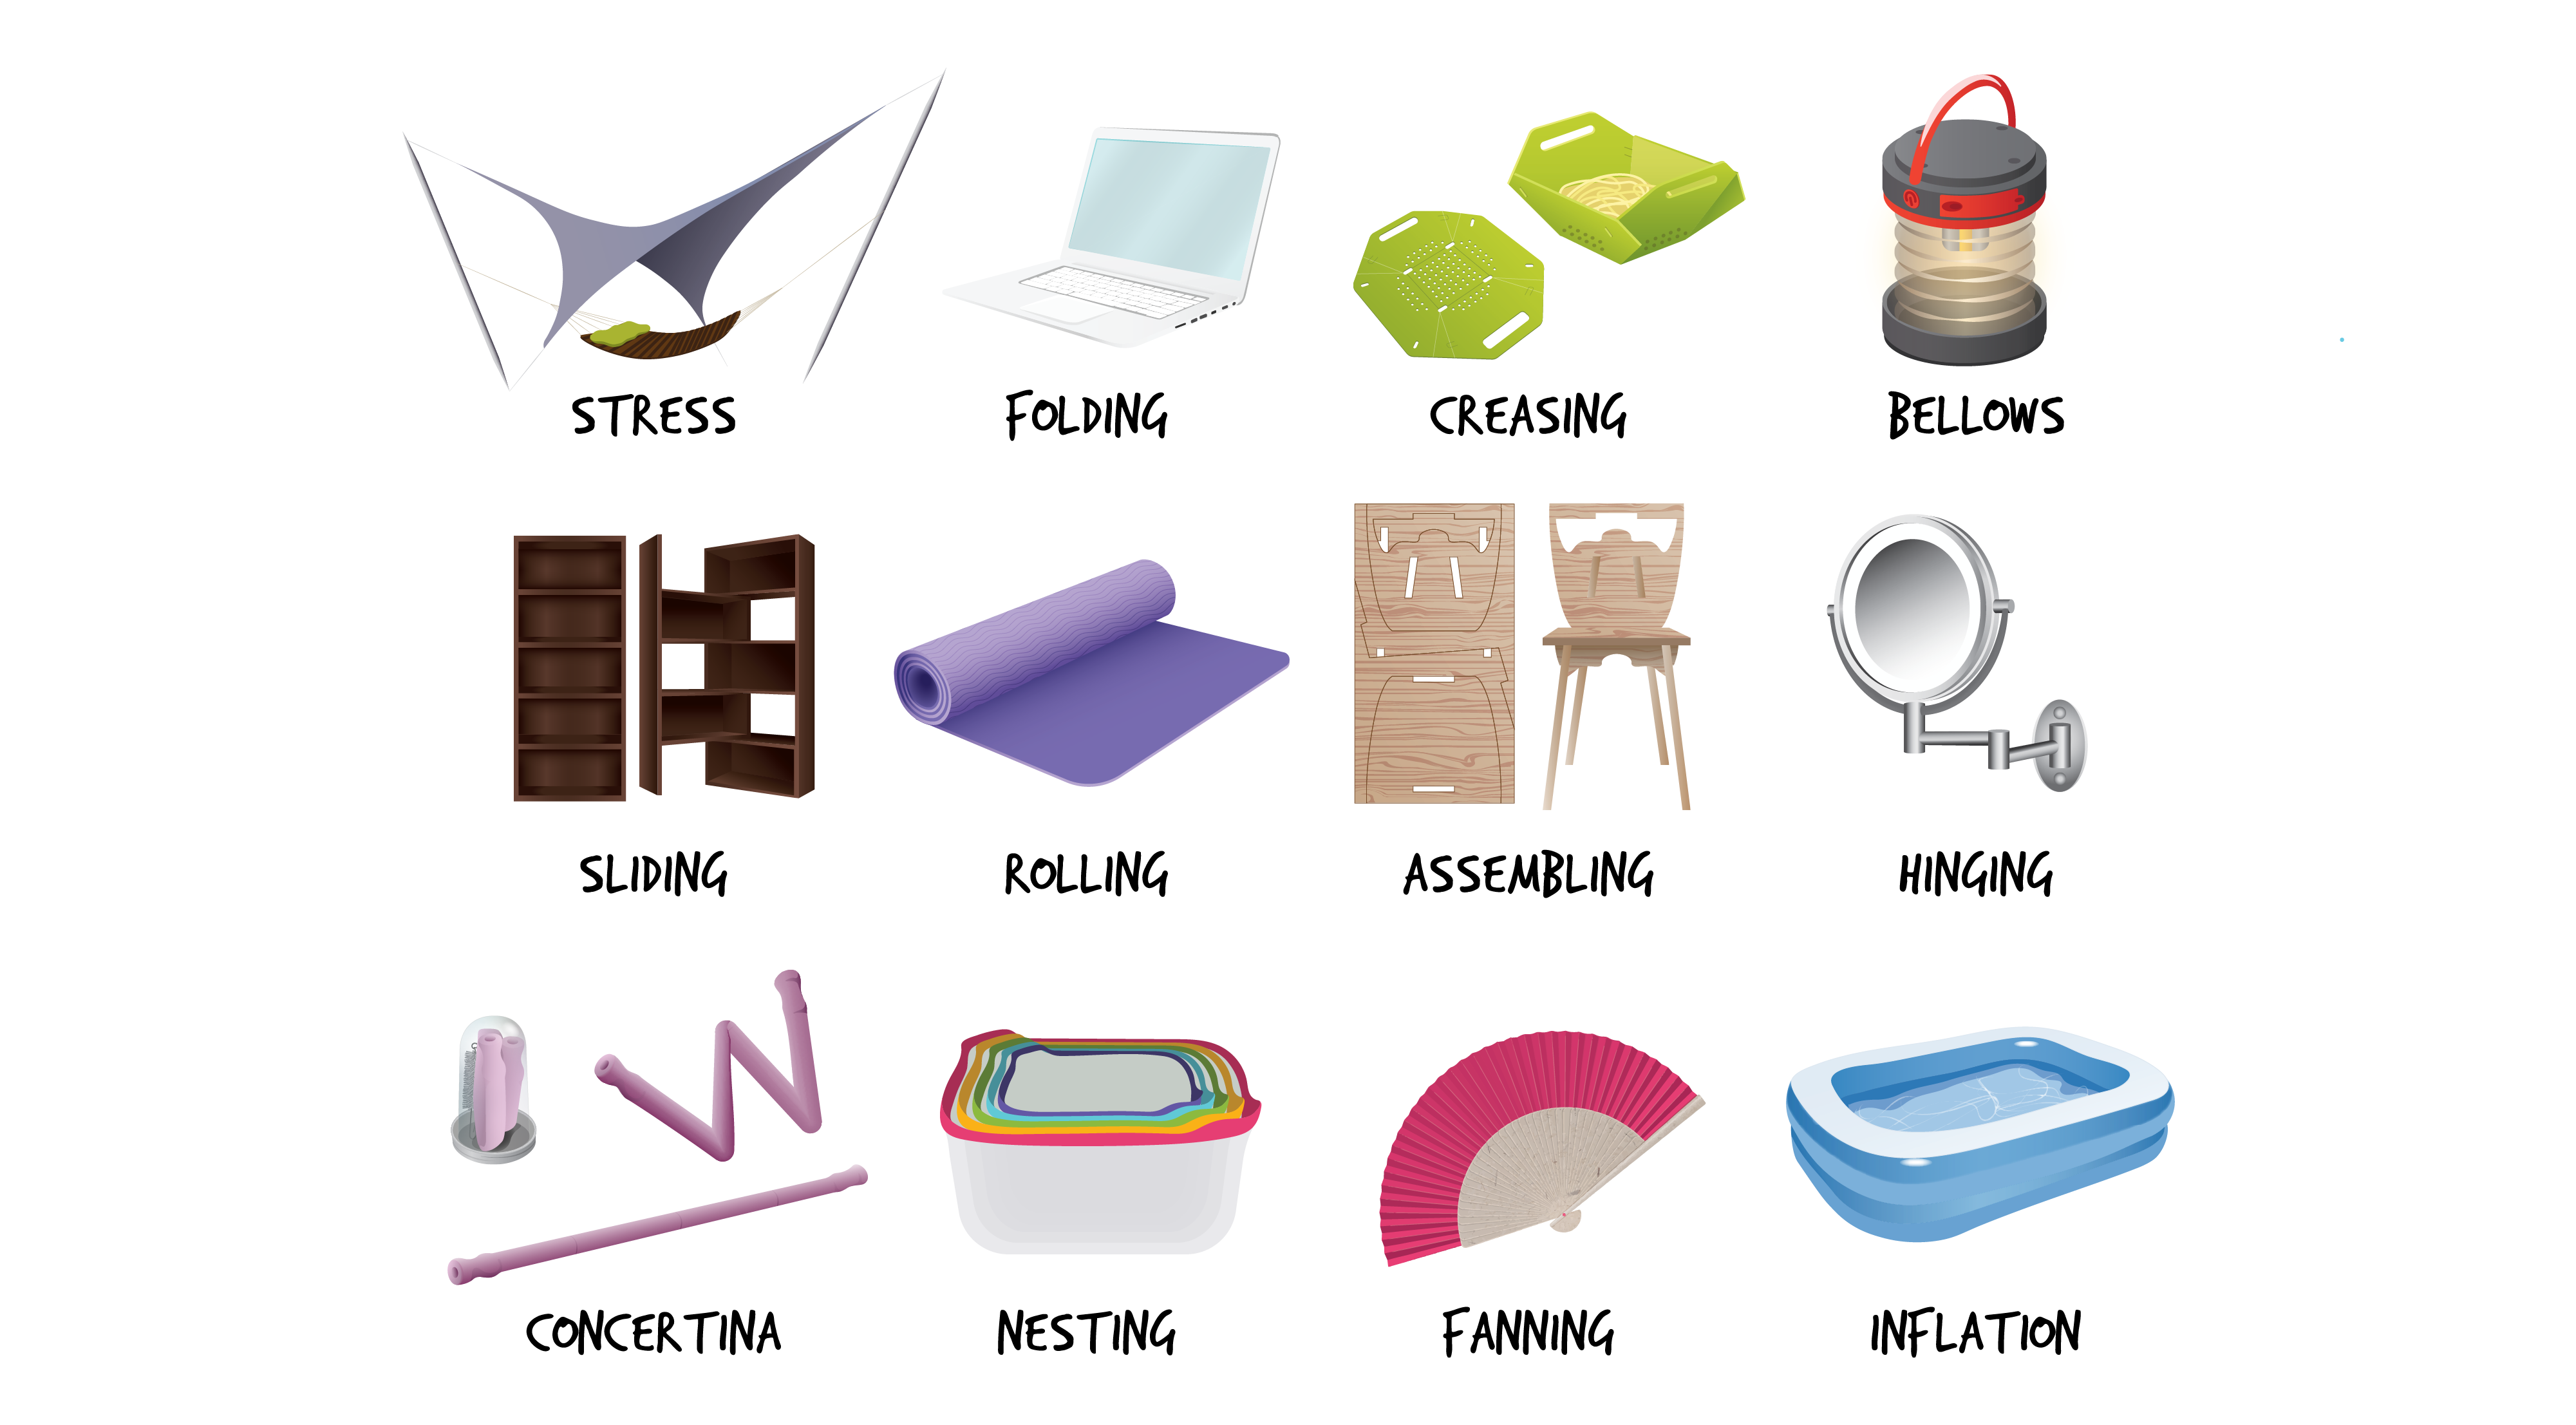 A series of 12 images show various examples of collapsible and kinetic design. 1. Stress: A brown hammock with green pillow and grey canopy over it. 2. Folding: A white laptop with the screen open. 3. Creasing: A green plastic takeout container and lid. 4. Bellows: A lantern with grey and red lid. 5. Sliding: brown wooden cabinets with different compartments. 6. Rolling: A purple yoga mat. 7. Assembling: Materials for putting together a wooden chair, and the assembled chair next to it. 8. Hinging: Circular wall mounted mirror. 9. Concertina: Jar with purple object inside, purple object bended in shape of W, long purple stick. 10. Nesting: Five containers inside one another (first has red edges, second has yellow edges, third has green edges, fourth has blue edges, fifth has purple edges). 11. Fanning: Pink and white folding paper fan. 12. Inflation: Inflatable blue pool.